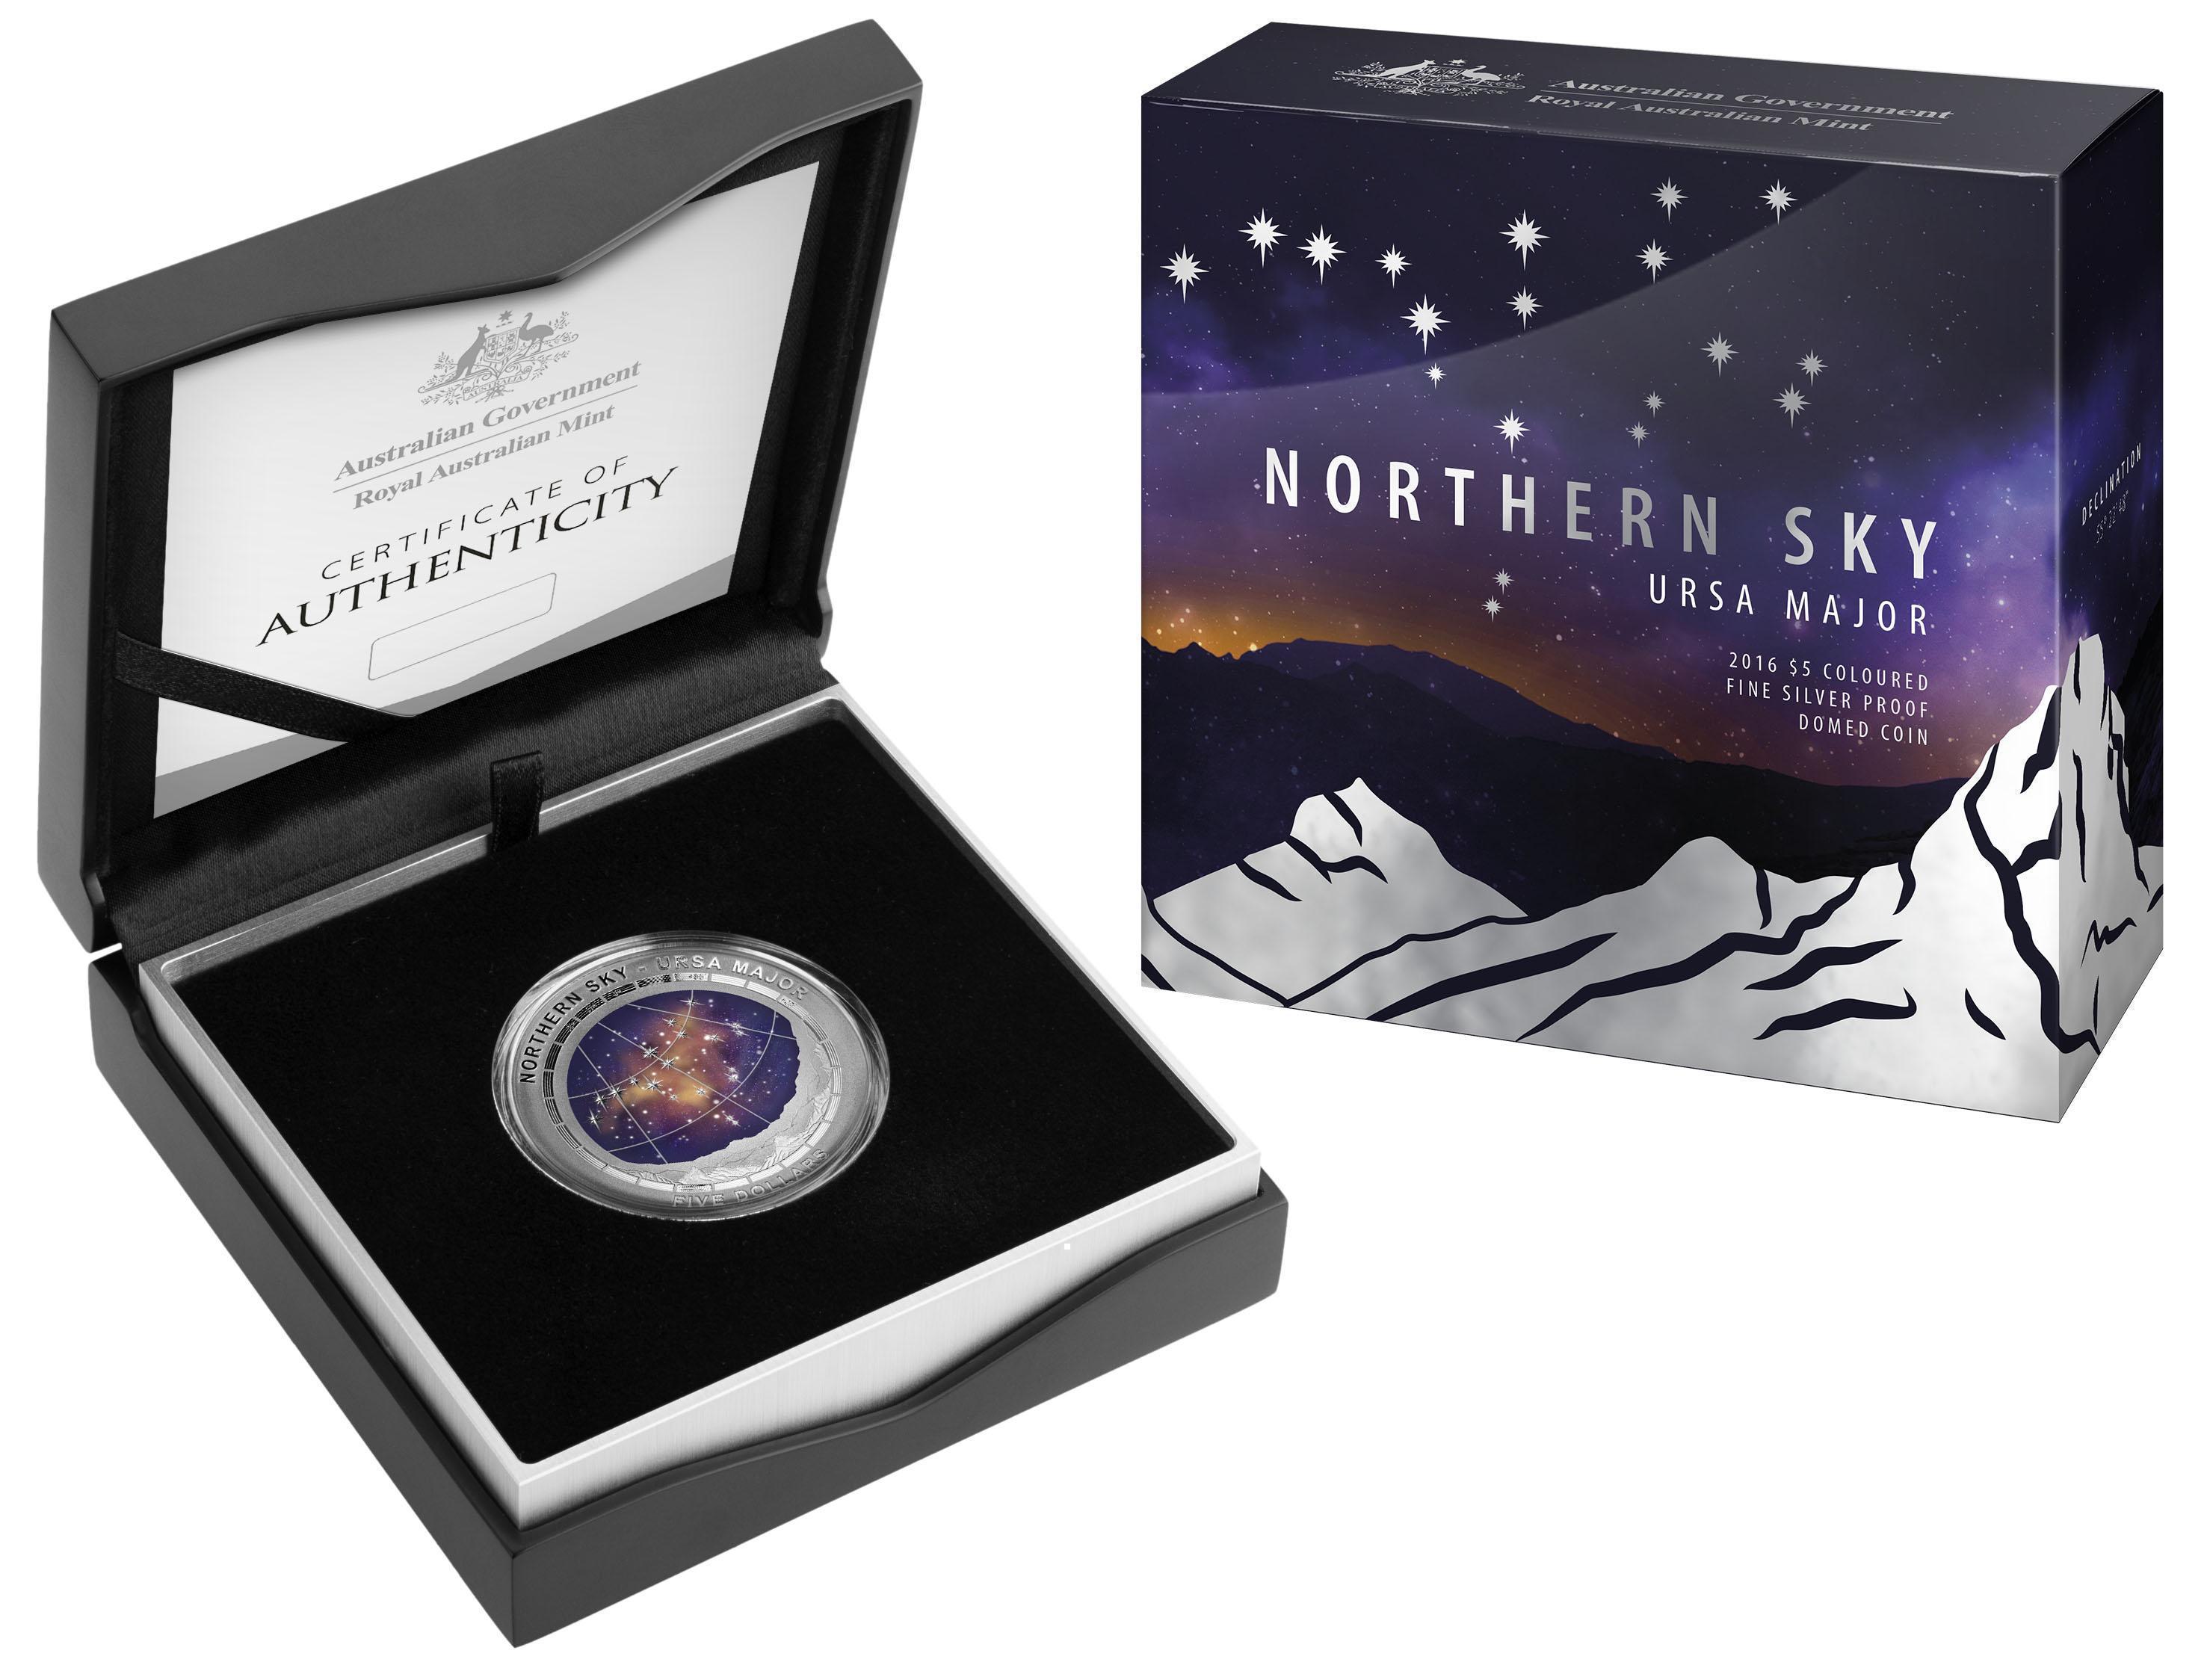 2016 $5 Northern Skies URSA MAJOR Colour Printed Silver Proof Domed Coin (RELEASED 4th July 2016)